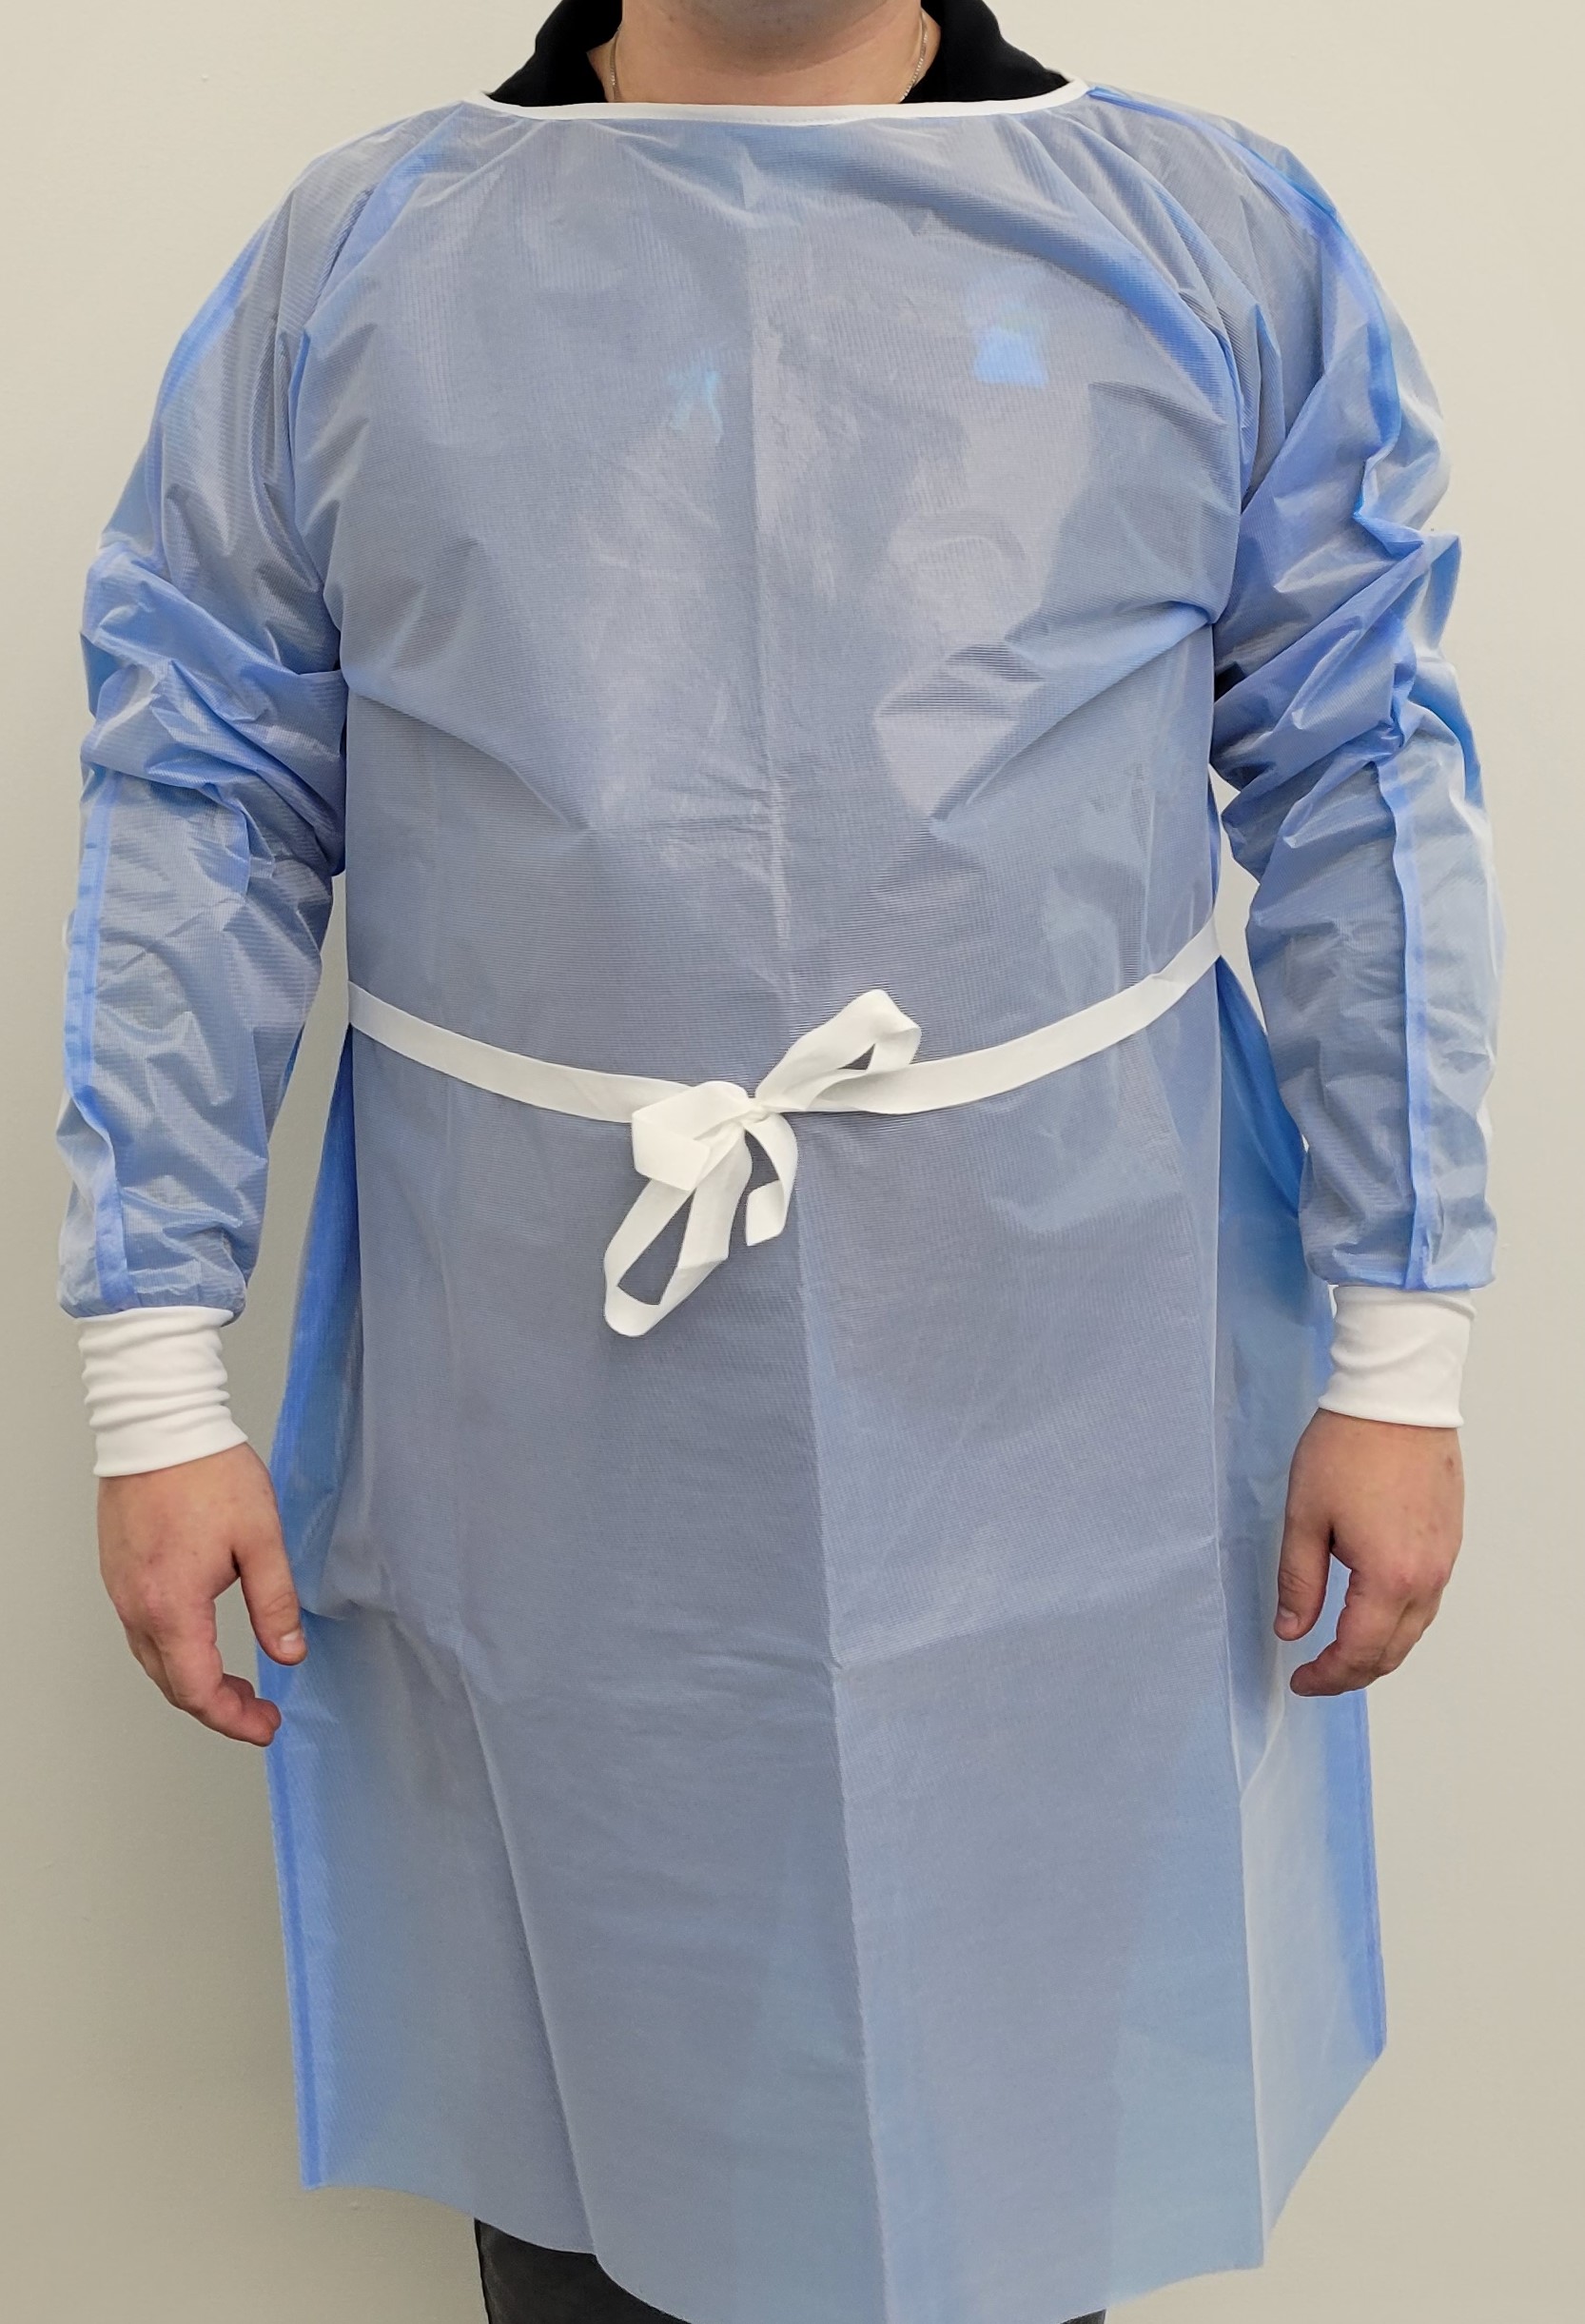 SGL201RC Shawmut Protex™ Shield Reusable Blue AAMI Level 2 Closed Back Style Multi-Layer Synthetic Laminate Blue Isolation Gowns with Knitted Wrists